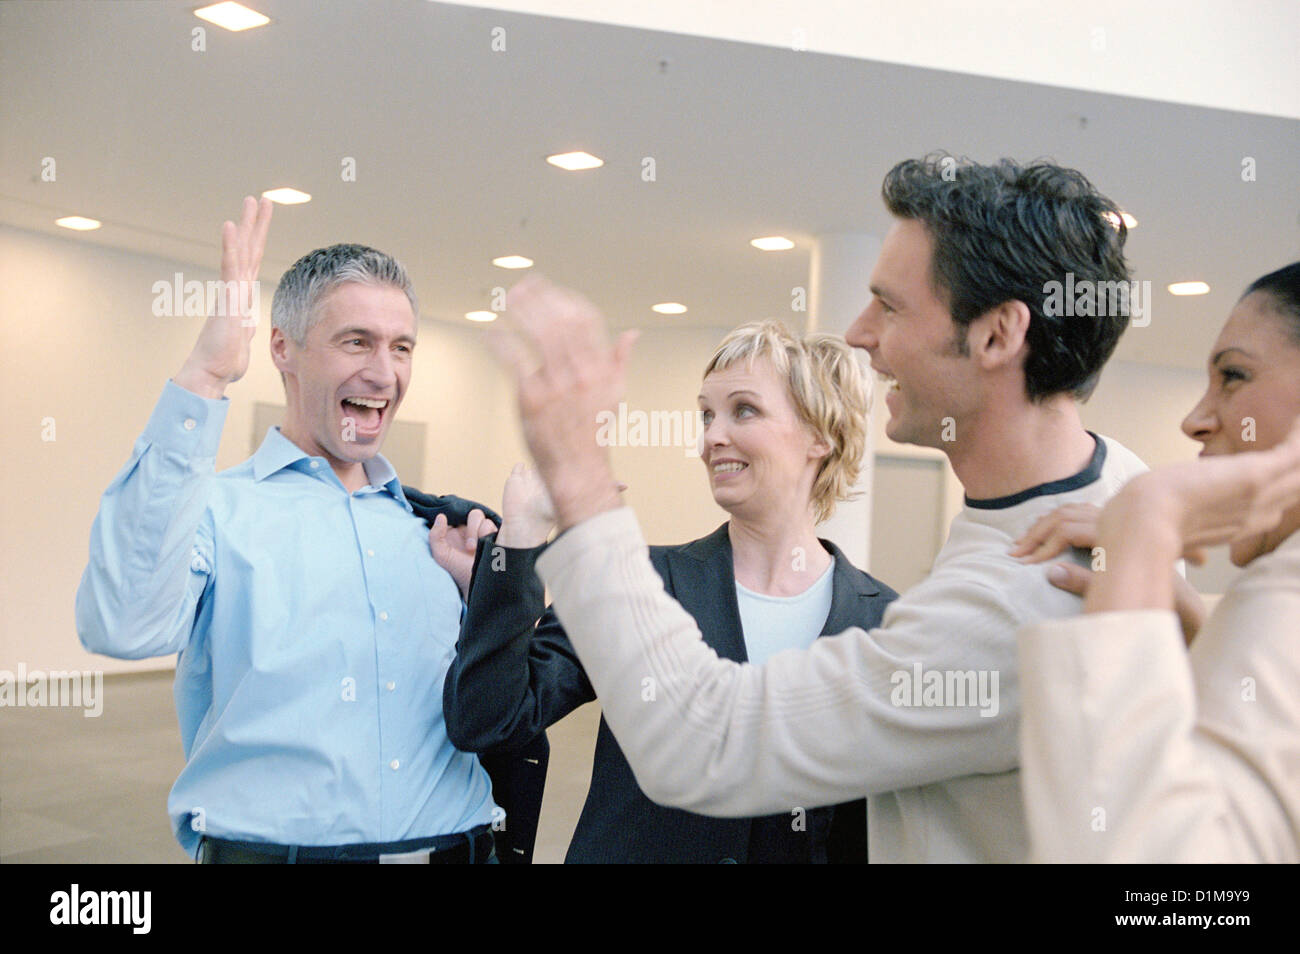 Two business people to give so a high five  License free except ads and billboards Stock Photo